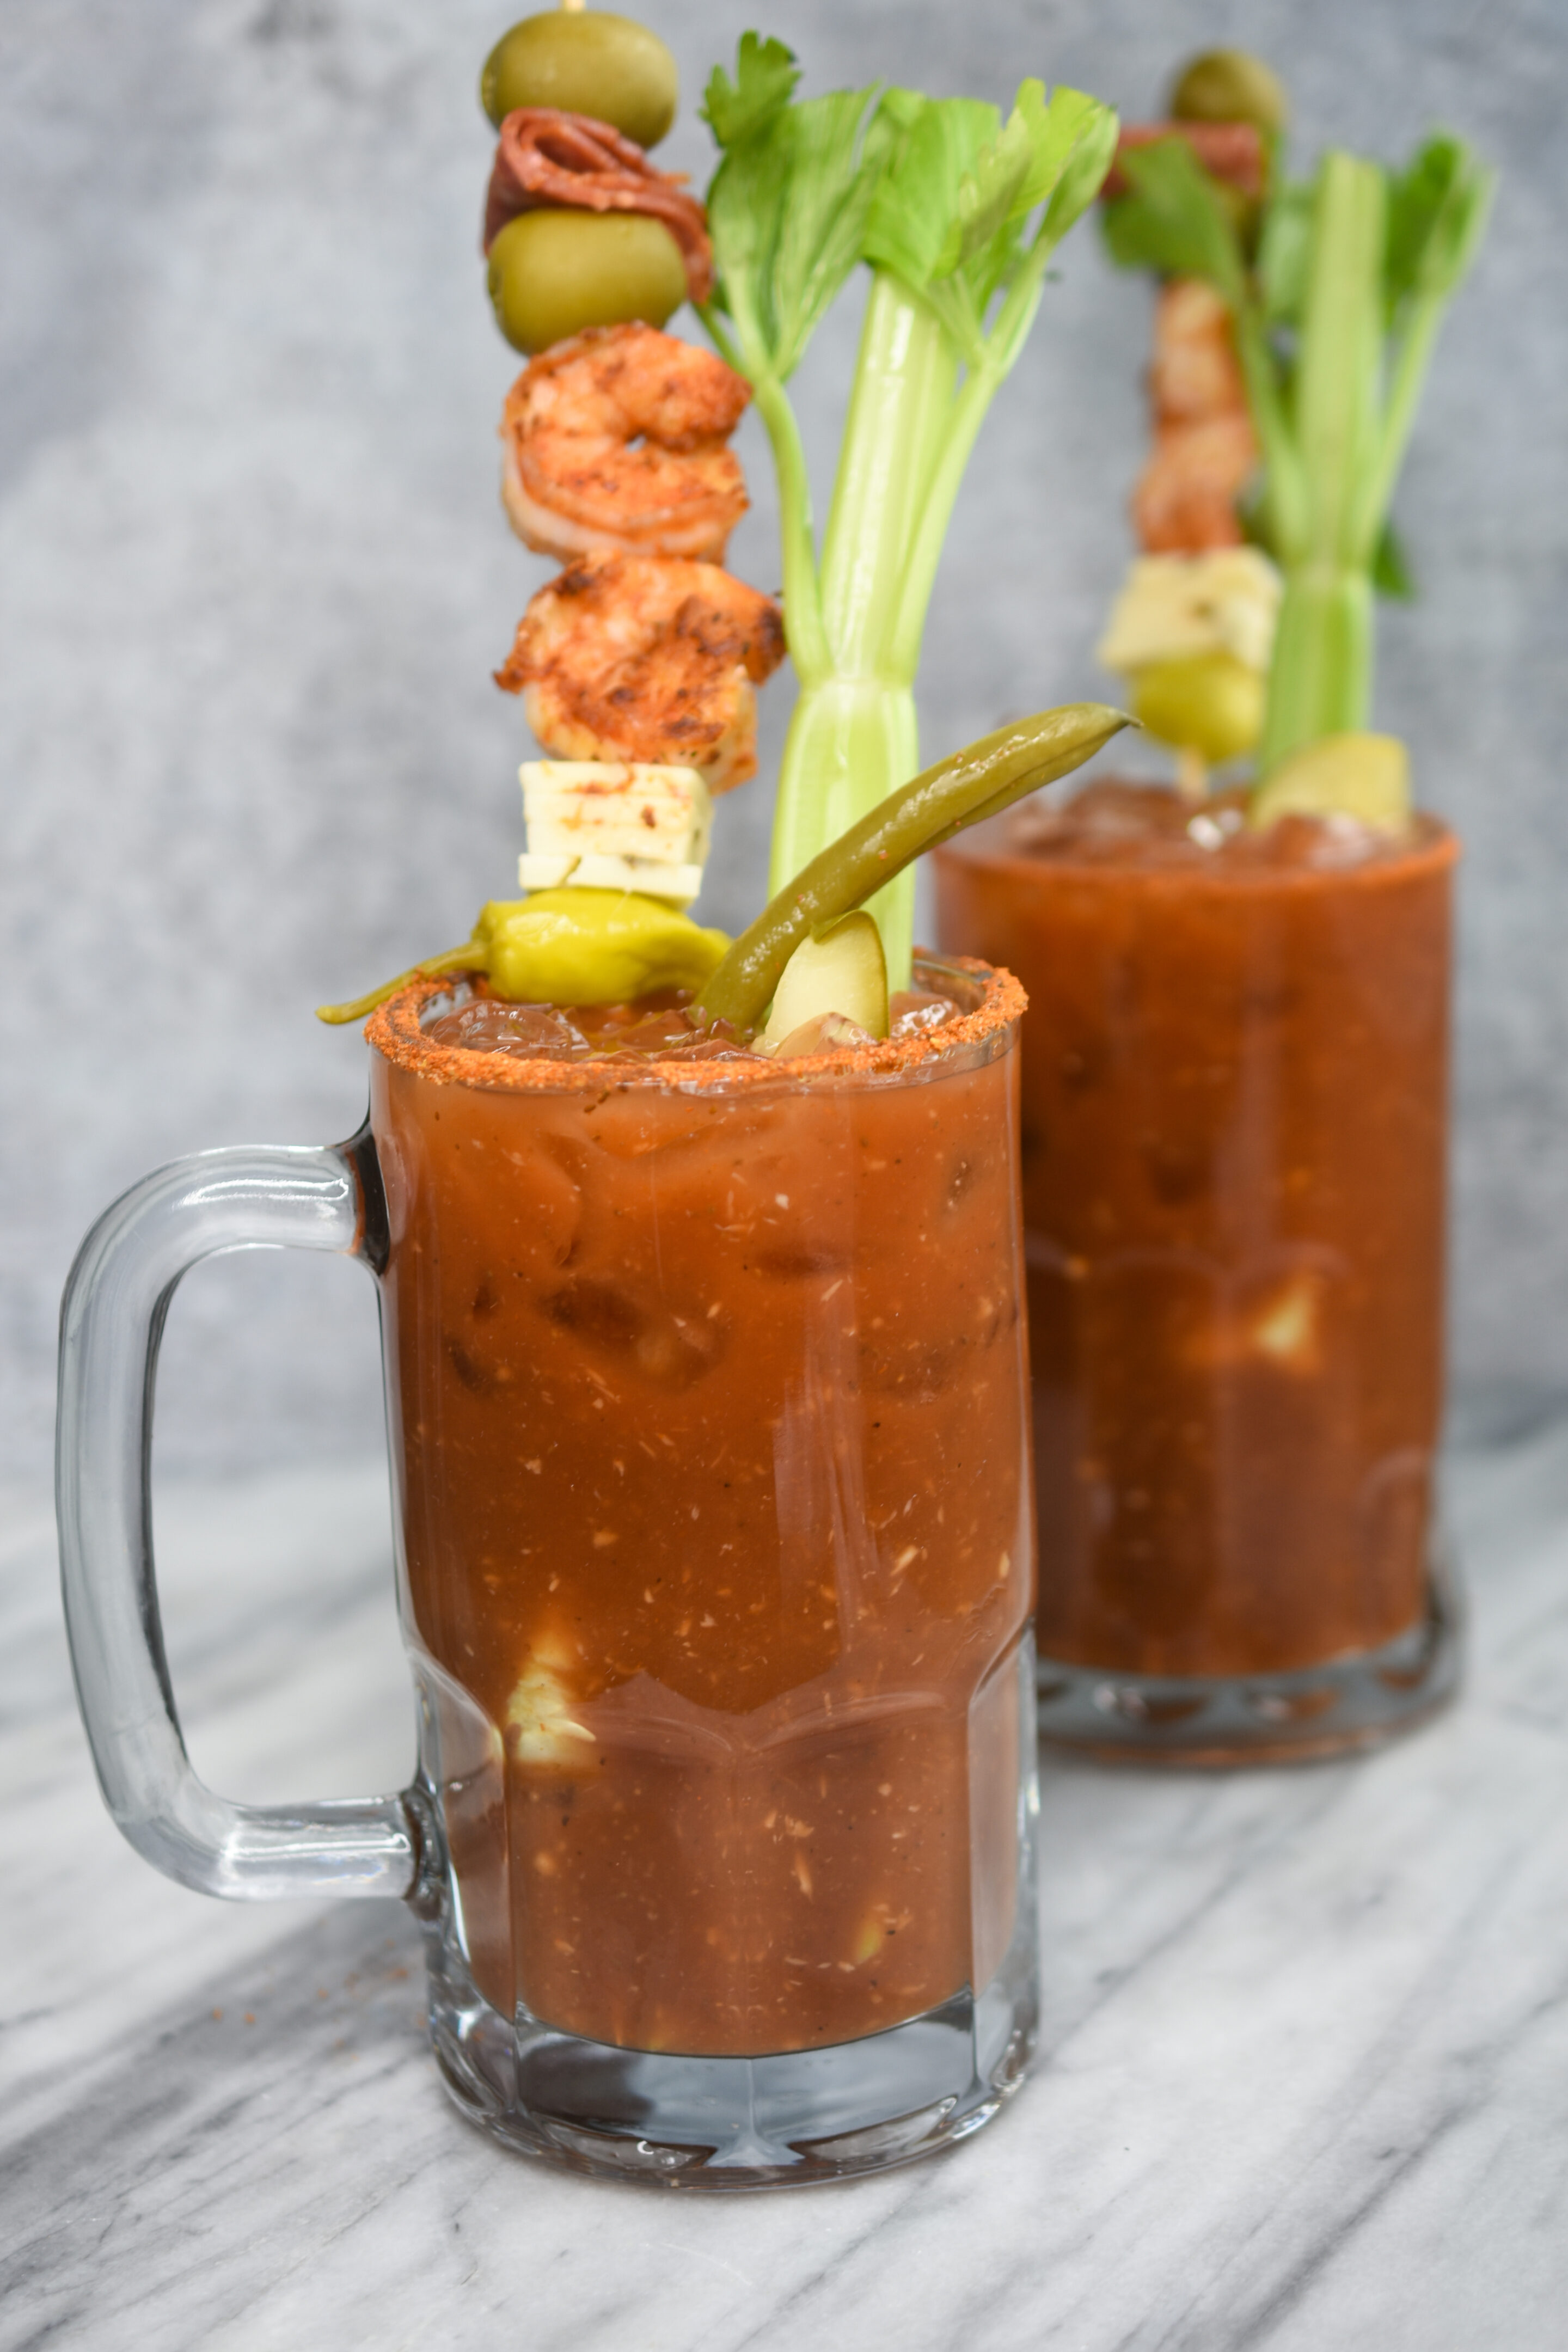 Best Bloody Mary recipe
Spicy Bloody Mary recipe